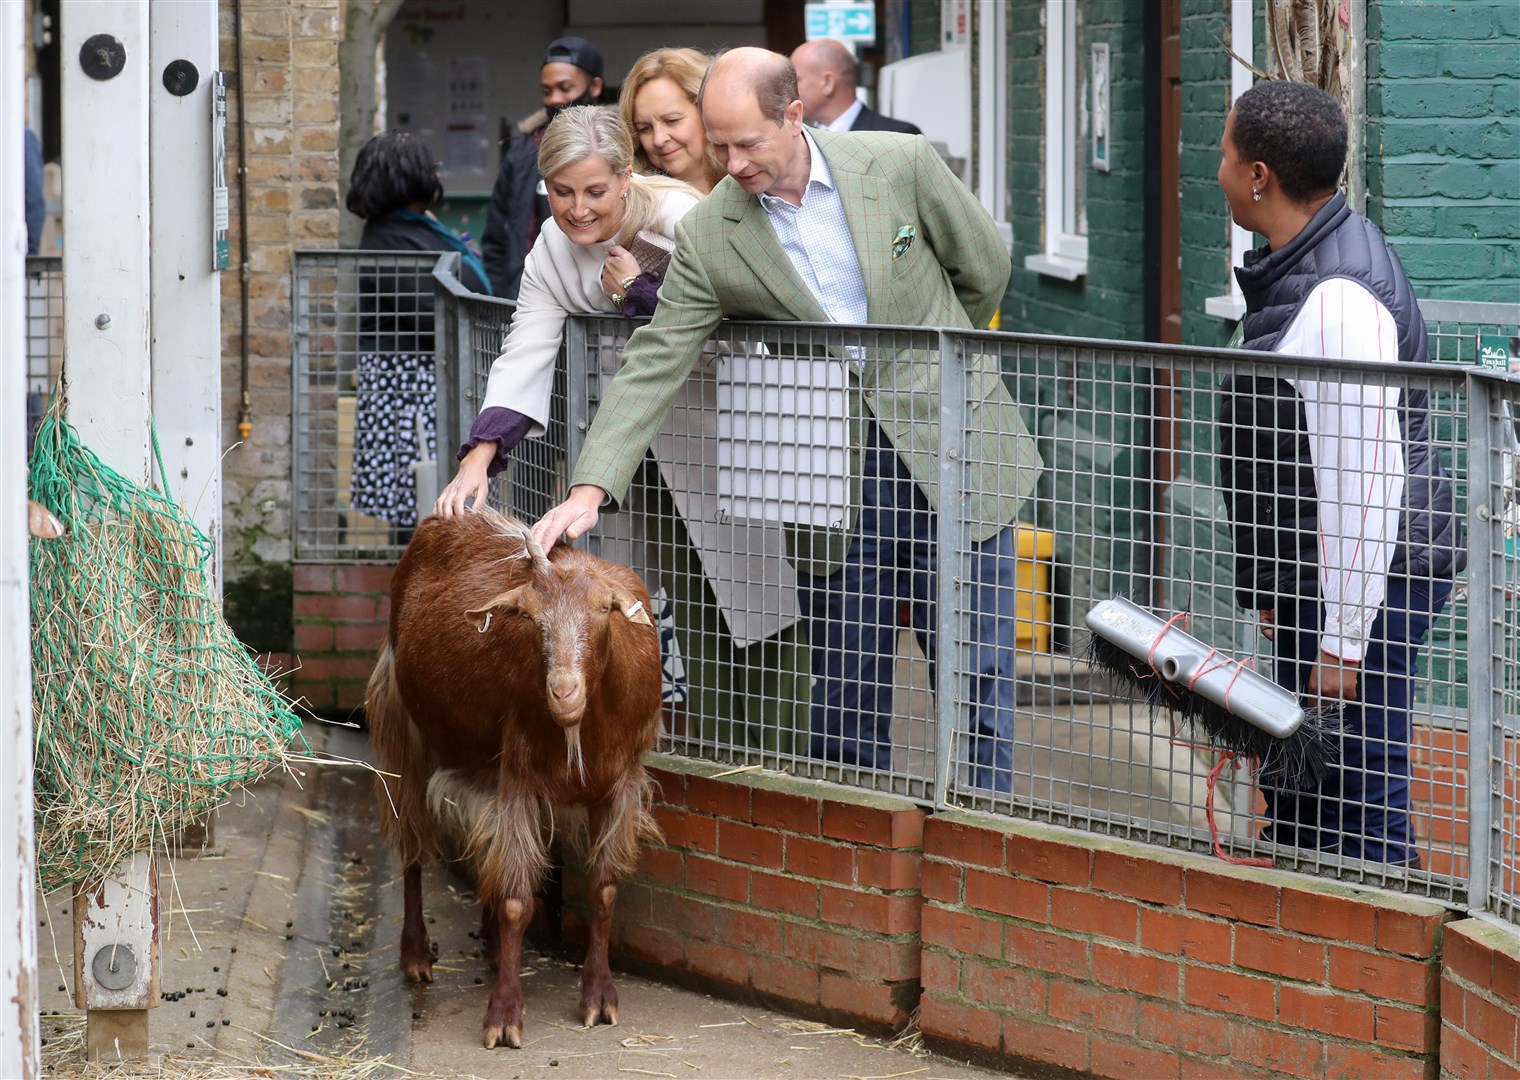 The couple stroked a goat during their visit (Chris Jackson/PA)